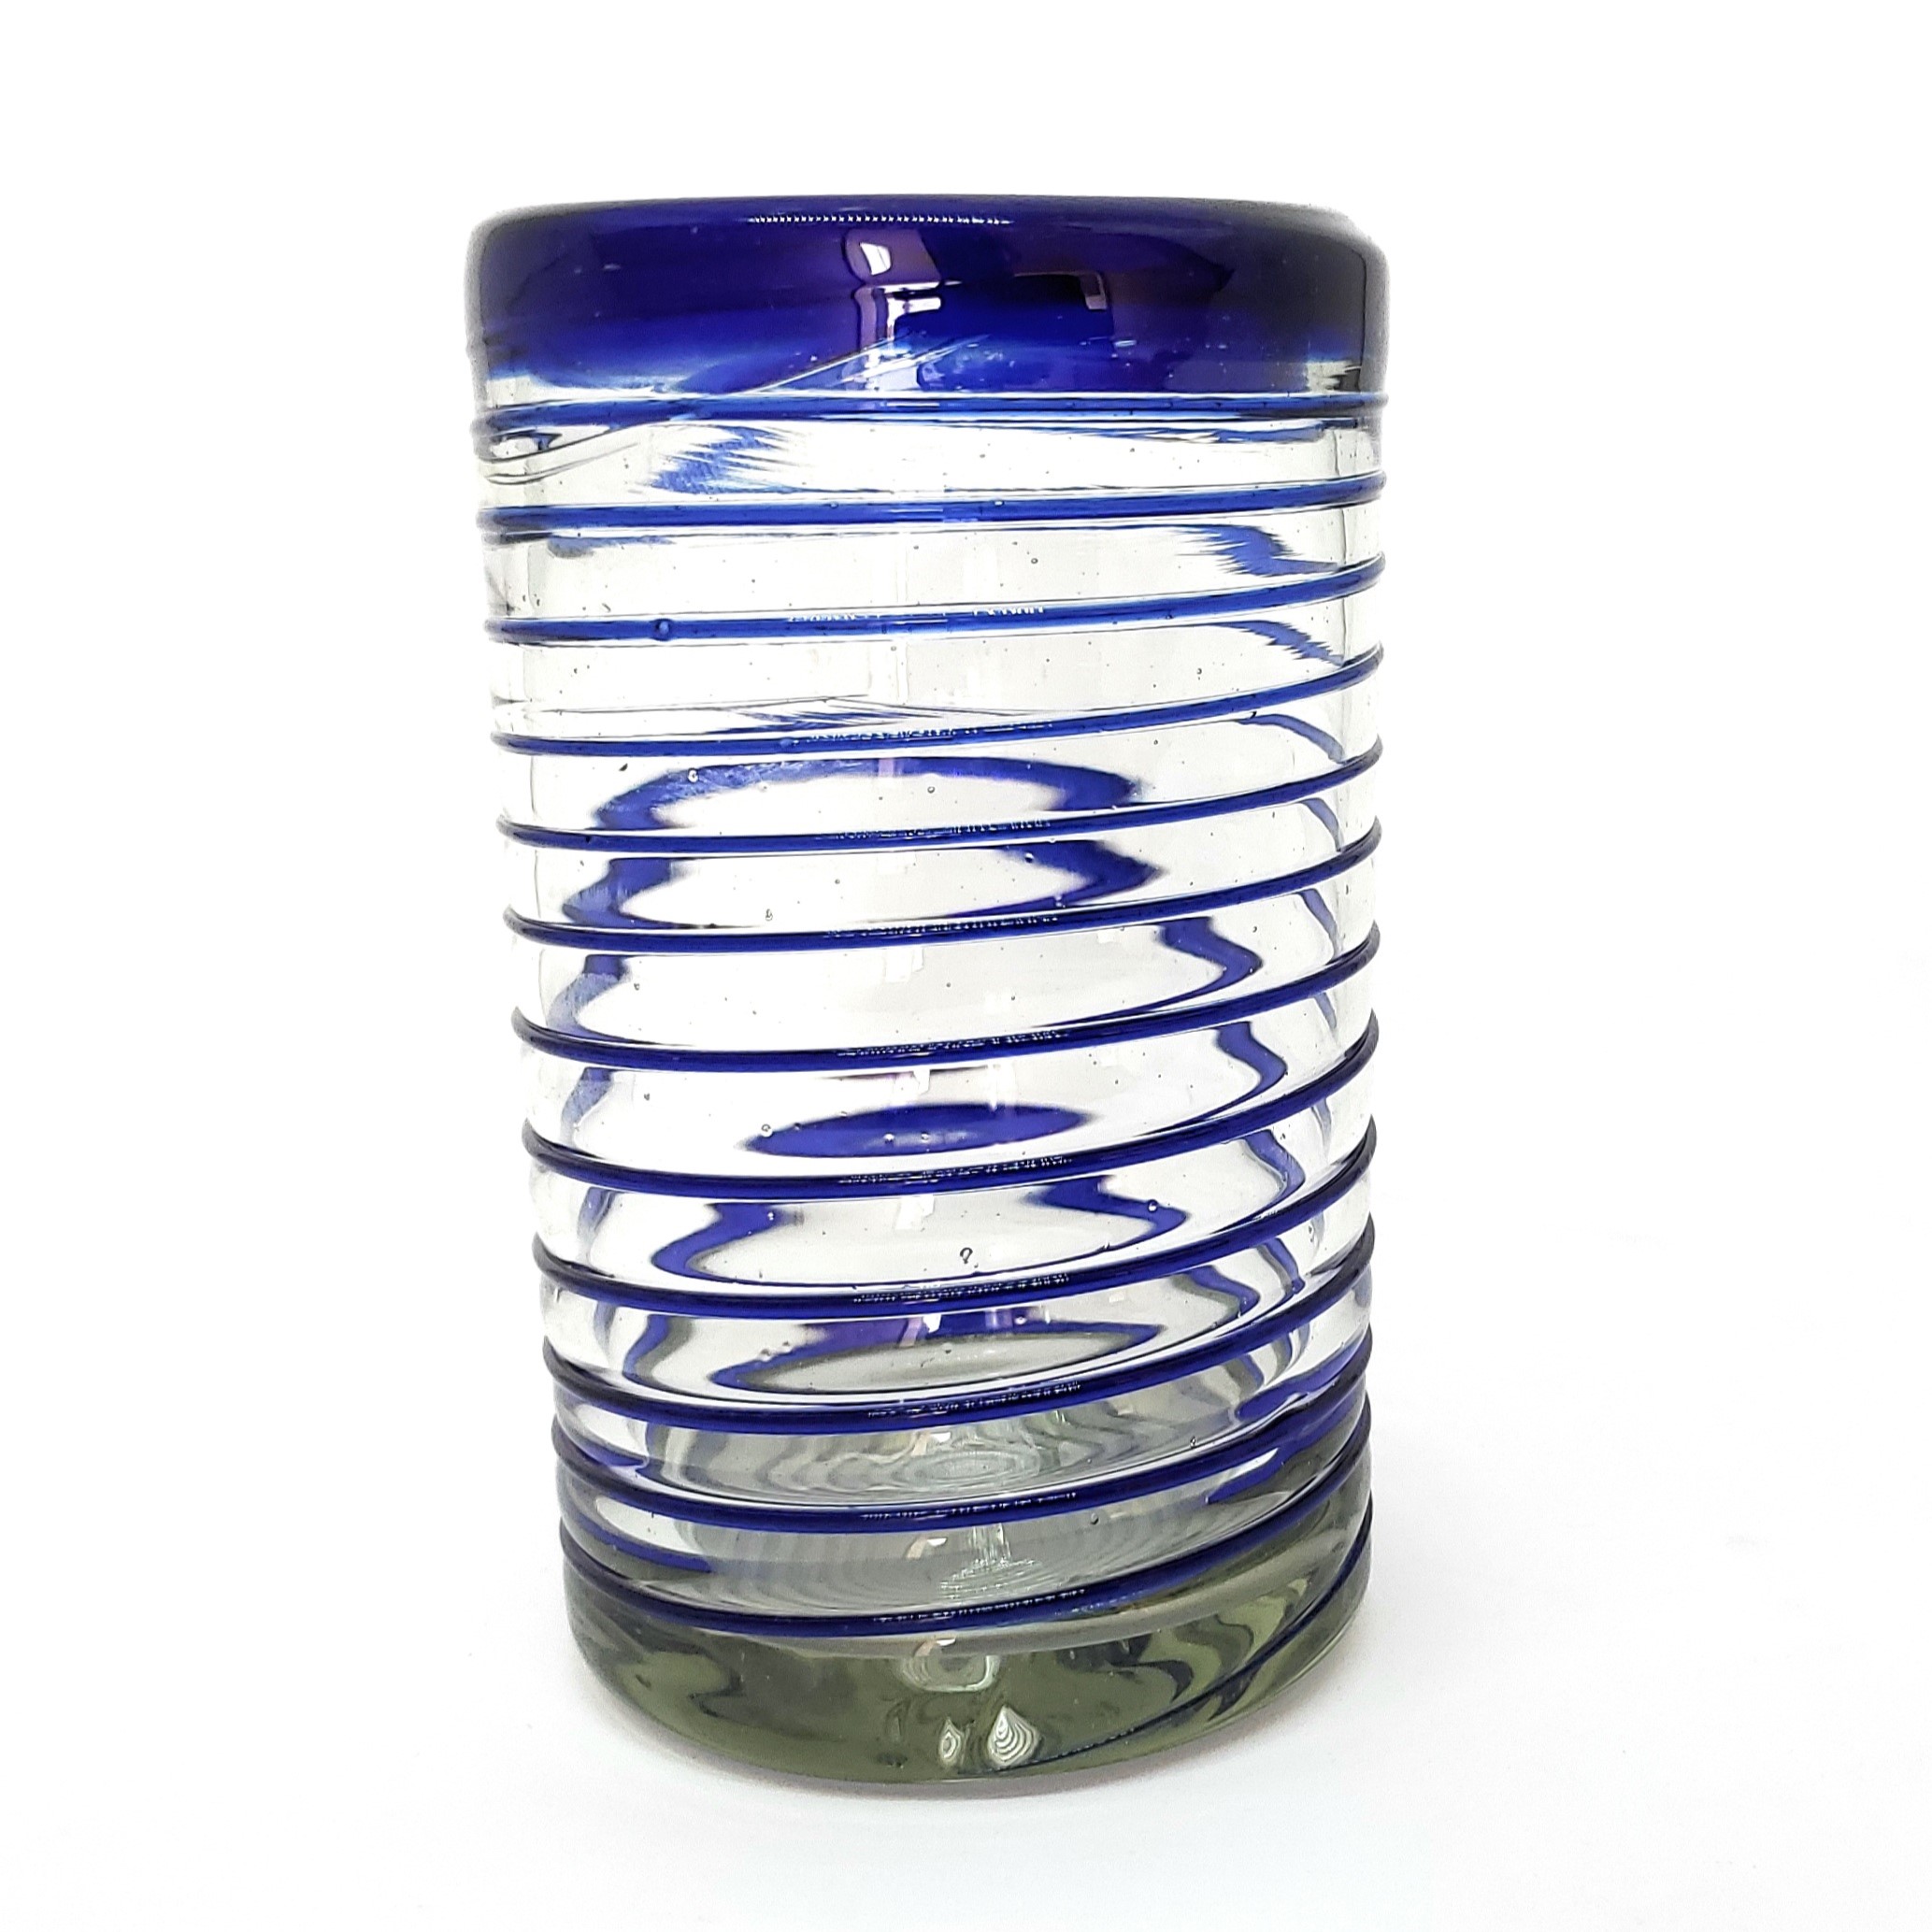 Wholesale Spiral Glassware / Cobalt Blue Spiral 14 oz Drinking Glasses  / These elegant glasses covered in a cobalt blue spiral will add a handcrafted touch to your kitchen decor.